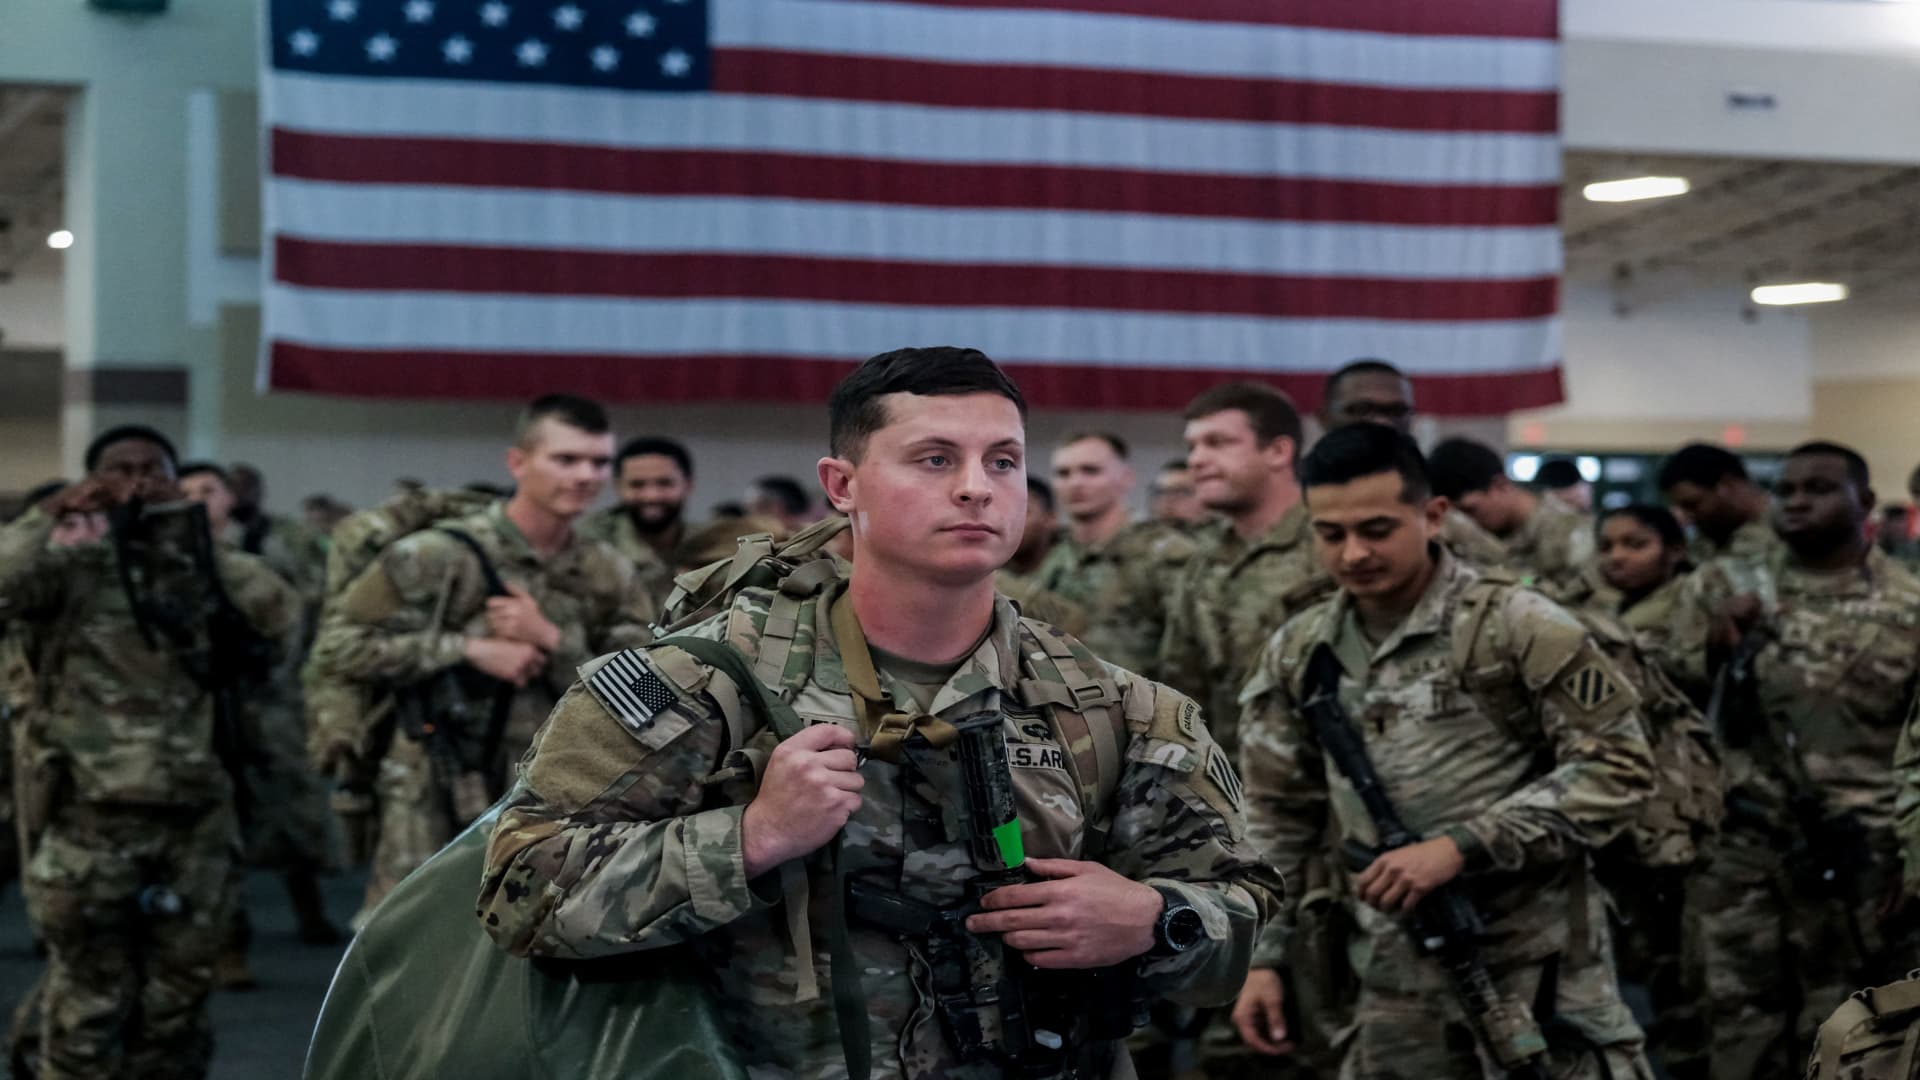 Soldiers from the U.S. Army’s 1st Armored Brigade Combat Team wait to board a transport plane bound for Europe on a deployment launched in response to the invasion of Ukraine by Russia, at Hunter Army Airfield, Georgia, U.S., March 2, 2022.